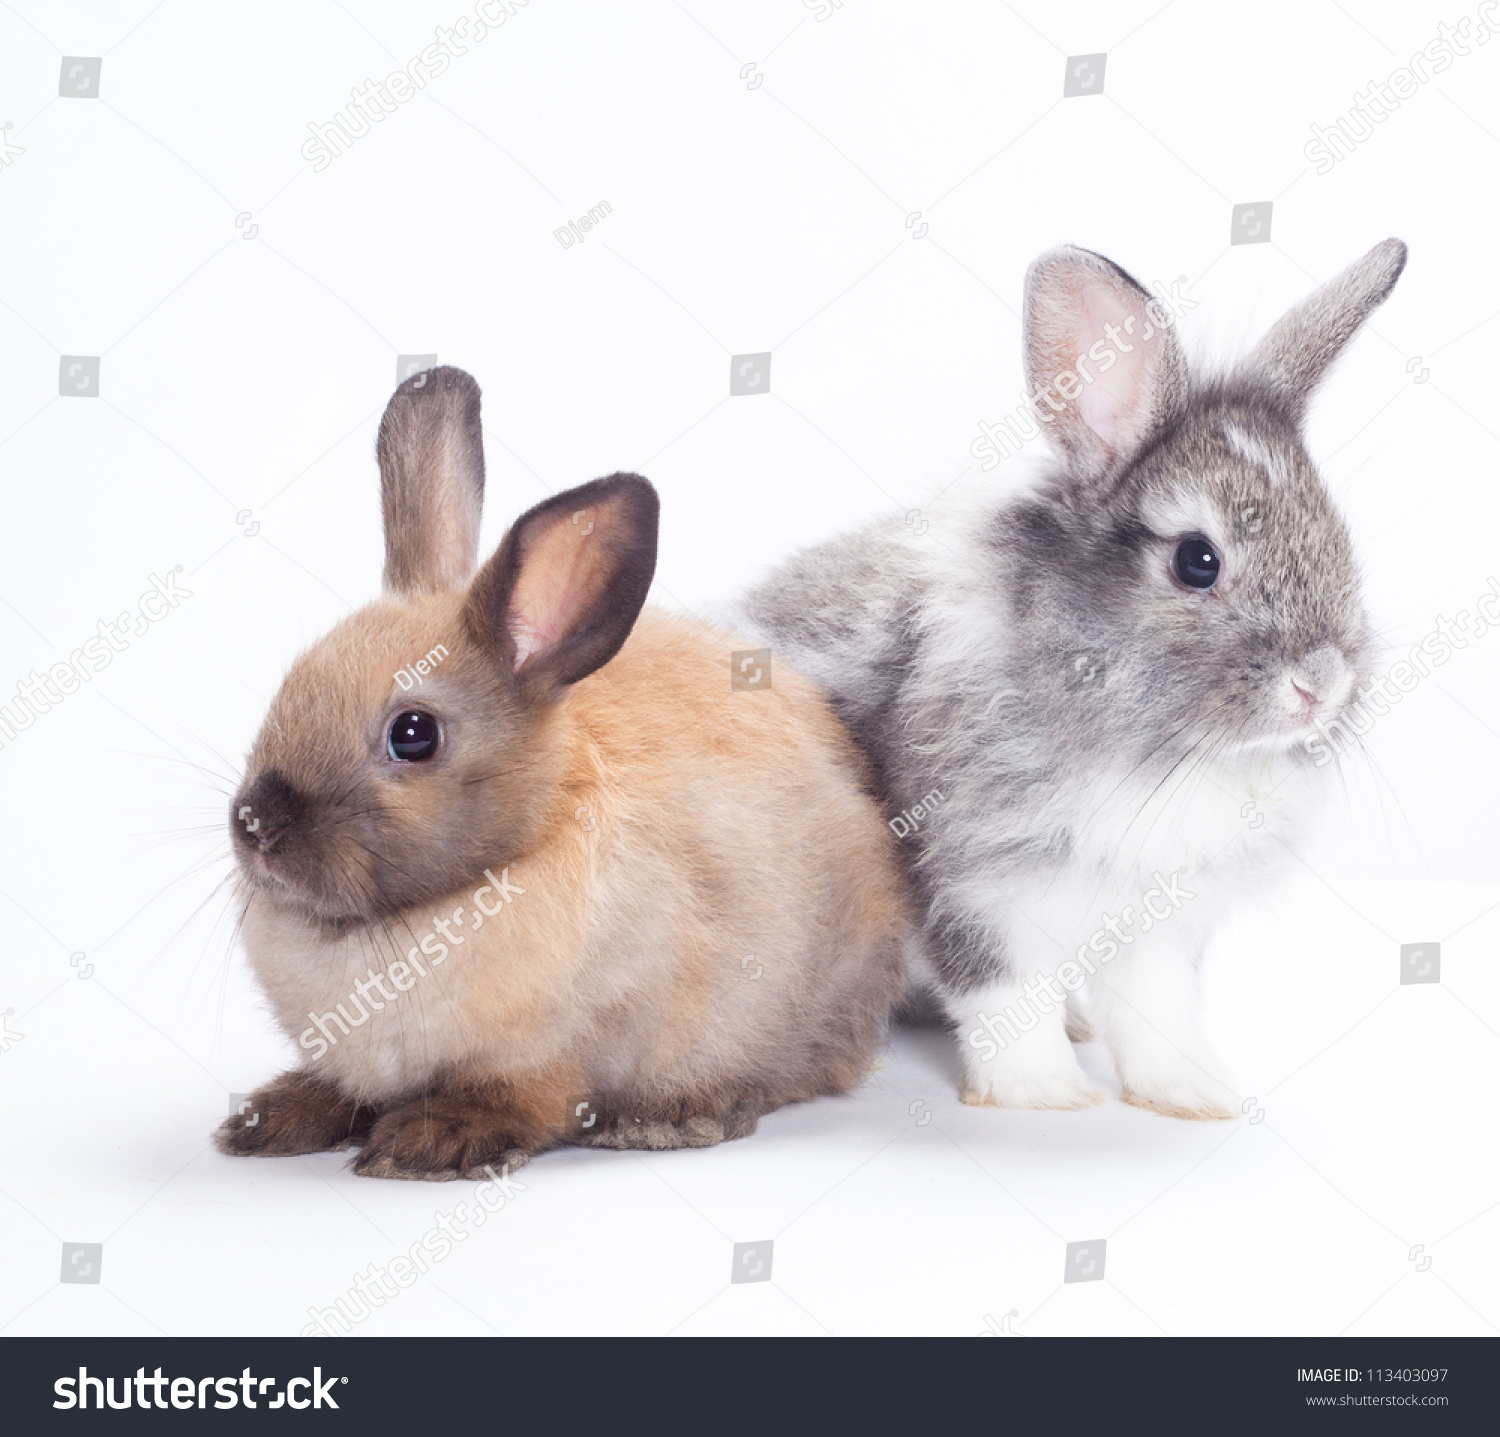 Two Rabbits Bunny Isolated On White Stock Photo (Royalty Free ...